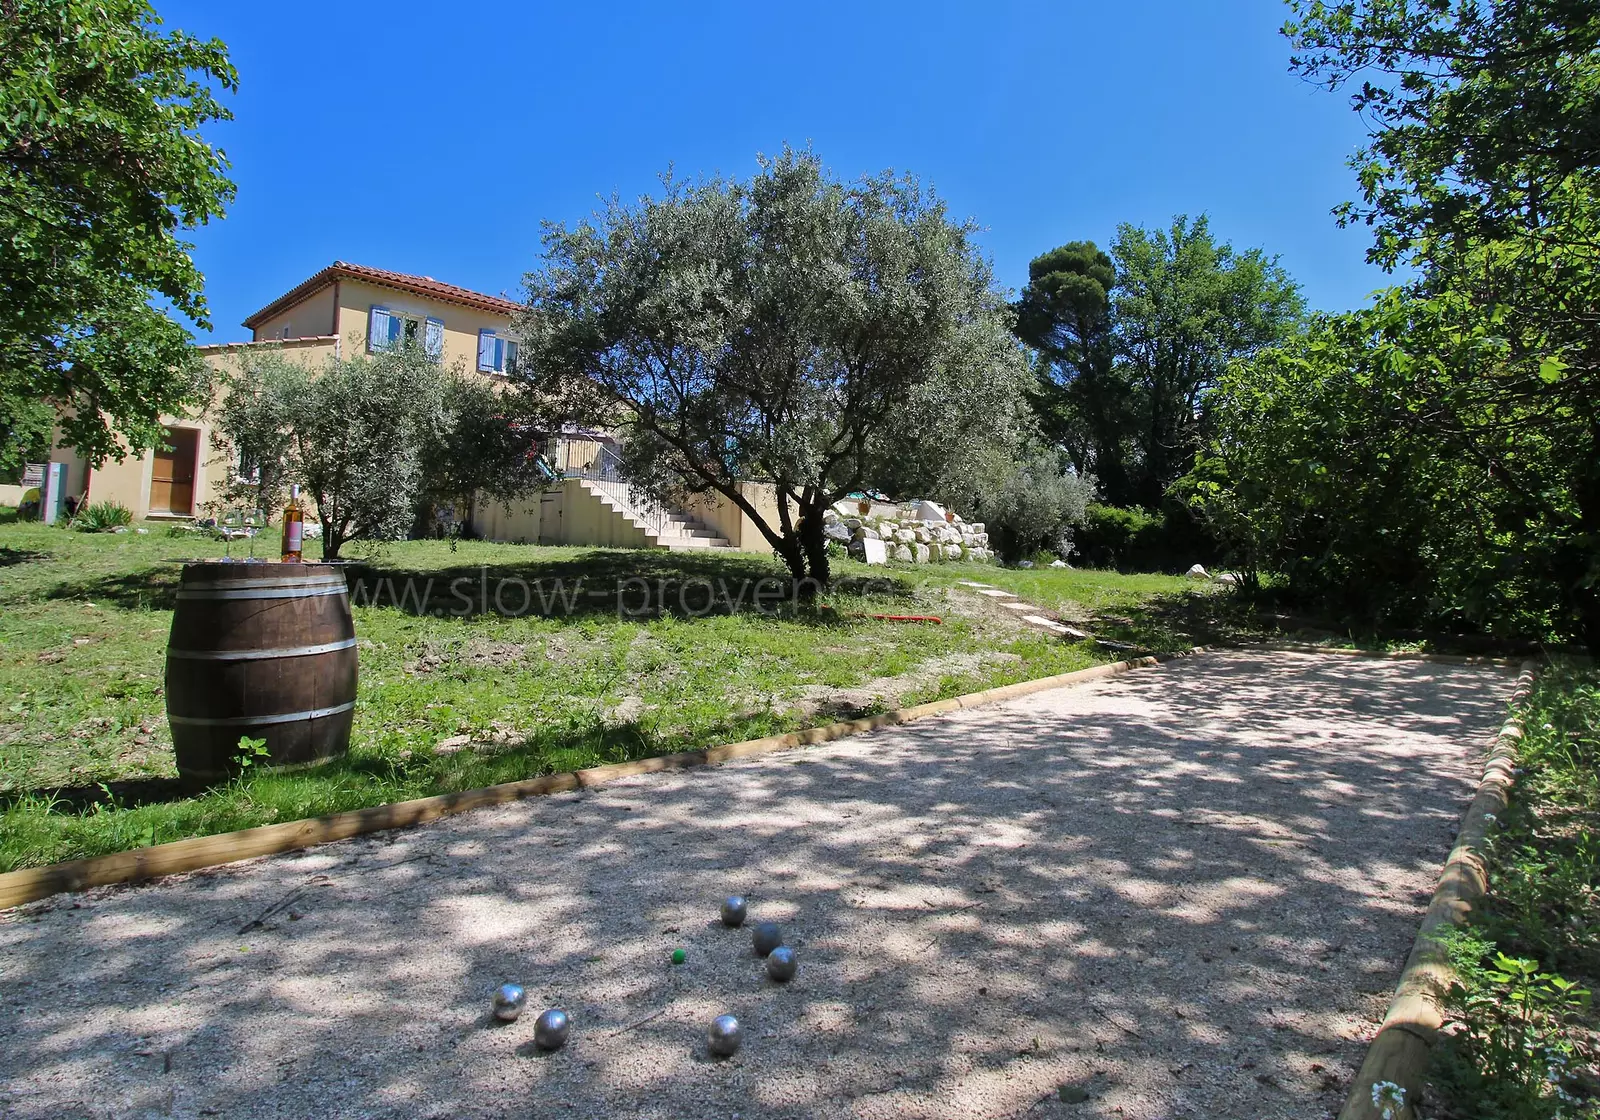 Family-friendly villa with garden, petanque and a pool